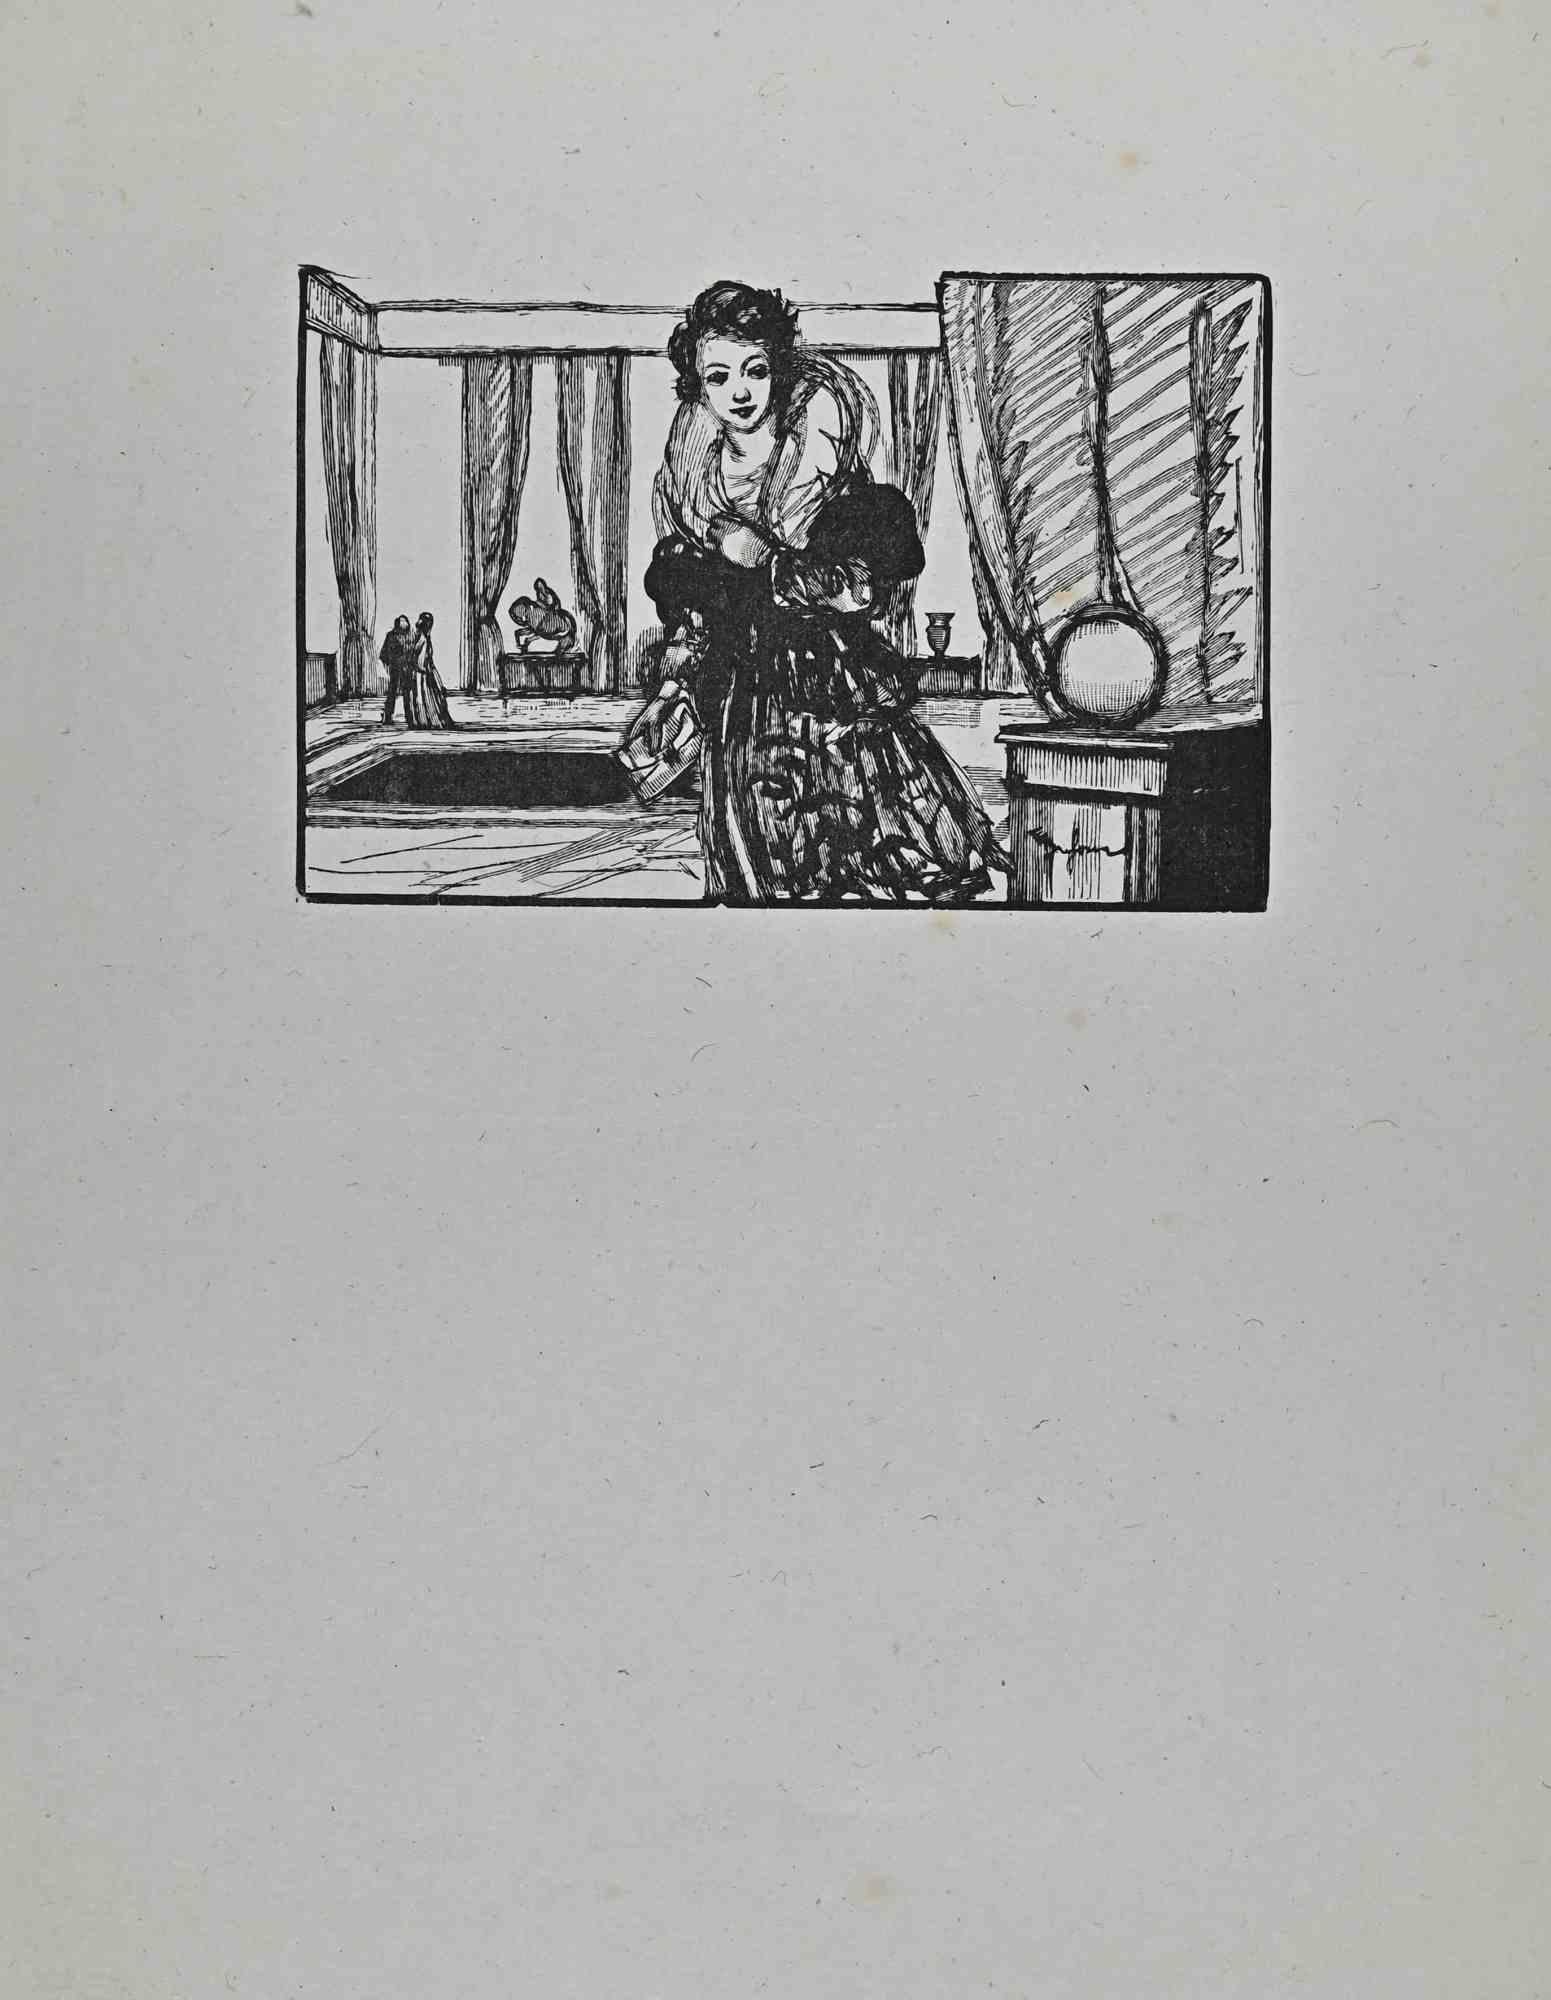 The Lady in The Museum is an original woodcut print on ivory-colored paper realized by Paul Baudier (1881-1962) in the 1930s.

Good condition.

Paul Baudier, (born October 18, 1881 in Paris and died December 9, 1962 in Châtillon), was a French